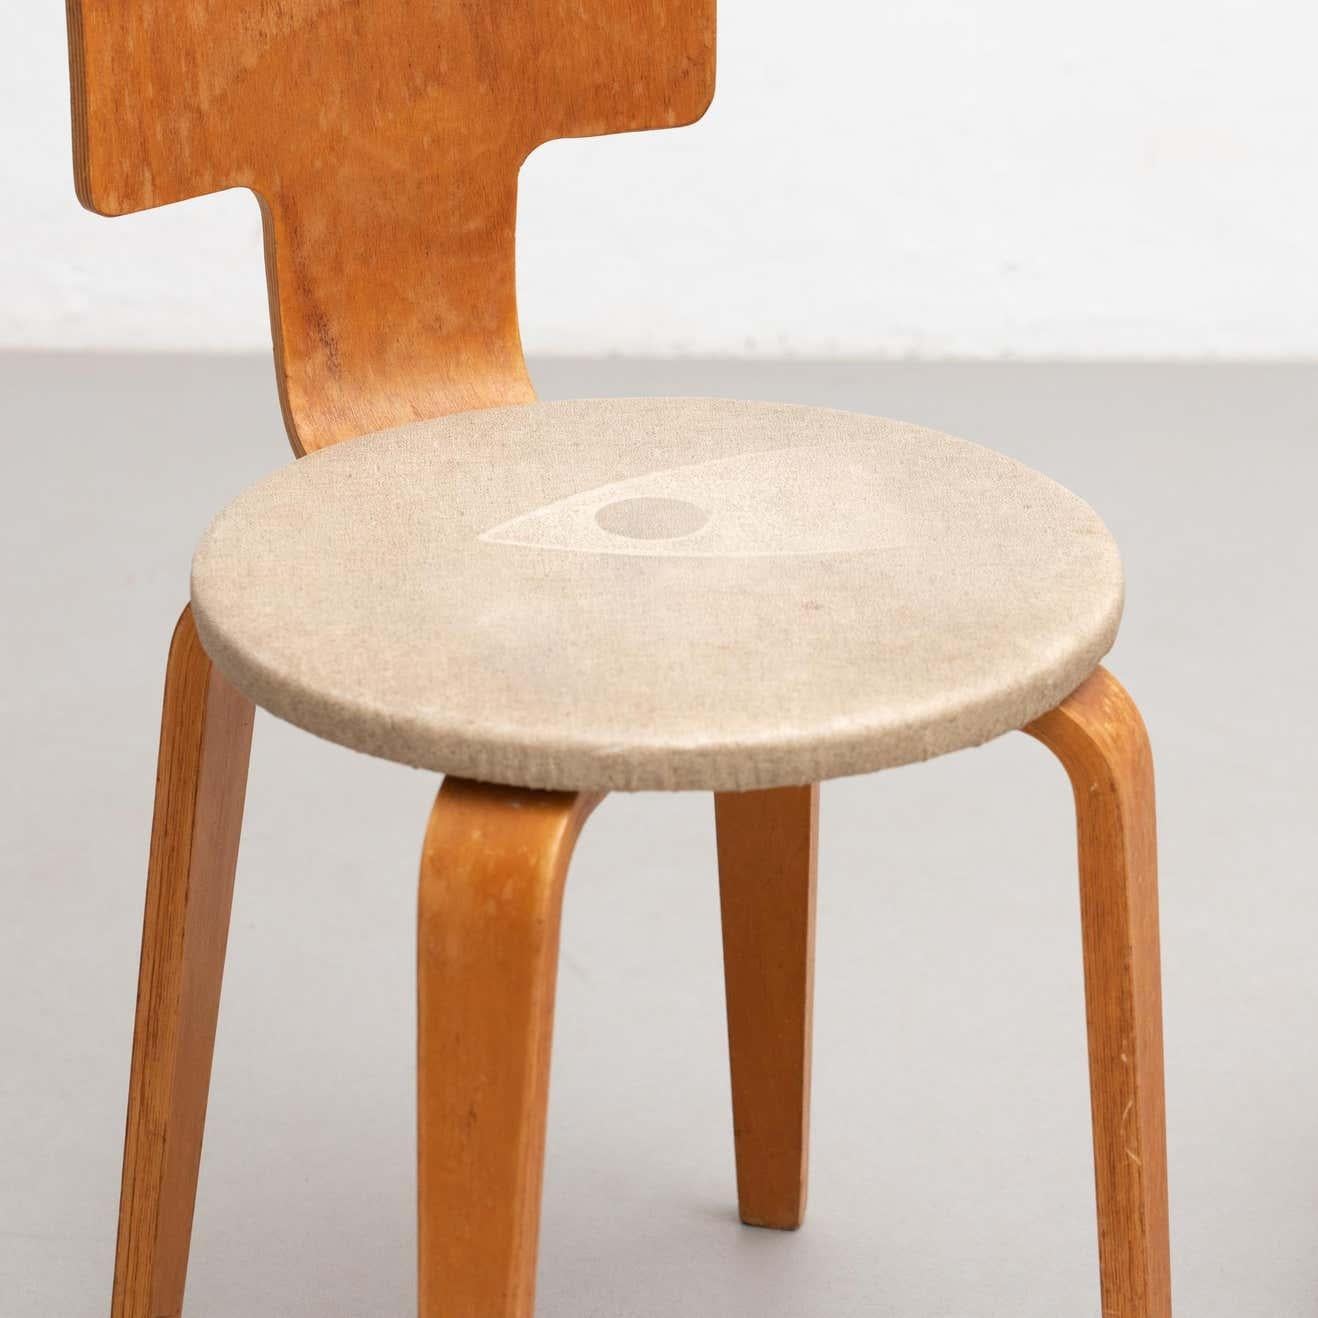 Set of Cor Alons Plywood and Upholstery Chair and Stool, circa 1950 For Sale 2